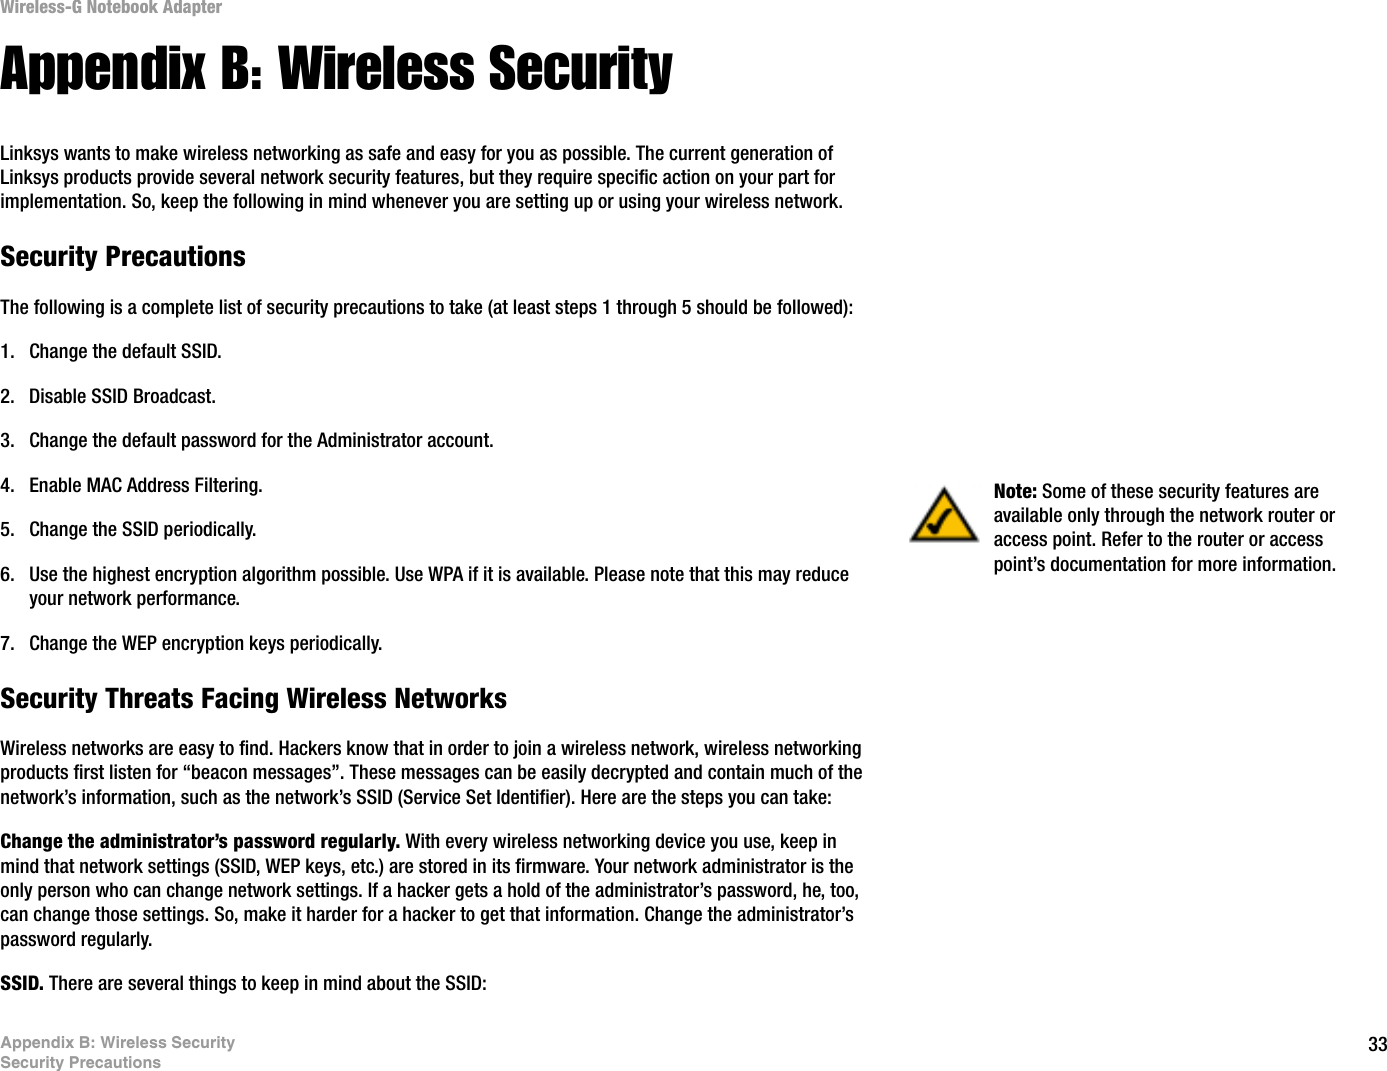 33Appendix B: Wireless SecuritySecurity PrecautionsWireless-G Notebook AdapterAppendix B: Wireless SecurityLinksys wants to make wireless networking as safe and easy for you as possible. The current generation of Linksys products provide several network security features, but they require specific action on your part for implementation. So, keep the following in mind whenever you are setting up or using your wireless network.Security PrecautionsThe following is a complete list of security precautions to take (at least steps 1 through 5 should be followed):1. Change the default SSID. 2. Disable SSID Broadcast. 3. Change the default password for the Administrator account. 4. Enable MAC Address Filtering. 5. Change the SSID periodically. 6. Use the highest encryption algorithm possible. Use WPA if it is available. Please note that this may reduce your network performance. 7. Change the WEP encryption keys periodically. Security Threats Facing Wireless Networks Wireless networks are easy to find. Hackers know that in order to join a wireless network, wireless networking products first listen for “beacon messages”. These messages can be easily decrypted and contain much of the network’s information, such as the network’s SSID (Service Set Identifier). Here are the steps you can take:Change the administrator’s password regularly. With every wireless networking device you use, keep in mind that network settings (SSID, WEP keys, etc.) are stored in its firmware. Your network administrator is the only person who can change network settings. If a hacker gets a hold of the administrator’s password, he, too, can change those settings. So, make it harder for a hacker to get that information. Change the administrator’s password regularly.SSID. There are several things to keep in mind about the SSID: Note: Some of these security features are available only through the network router or access point. Refer to the router or access point’s documentation for more information.